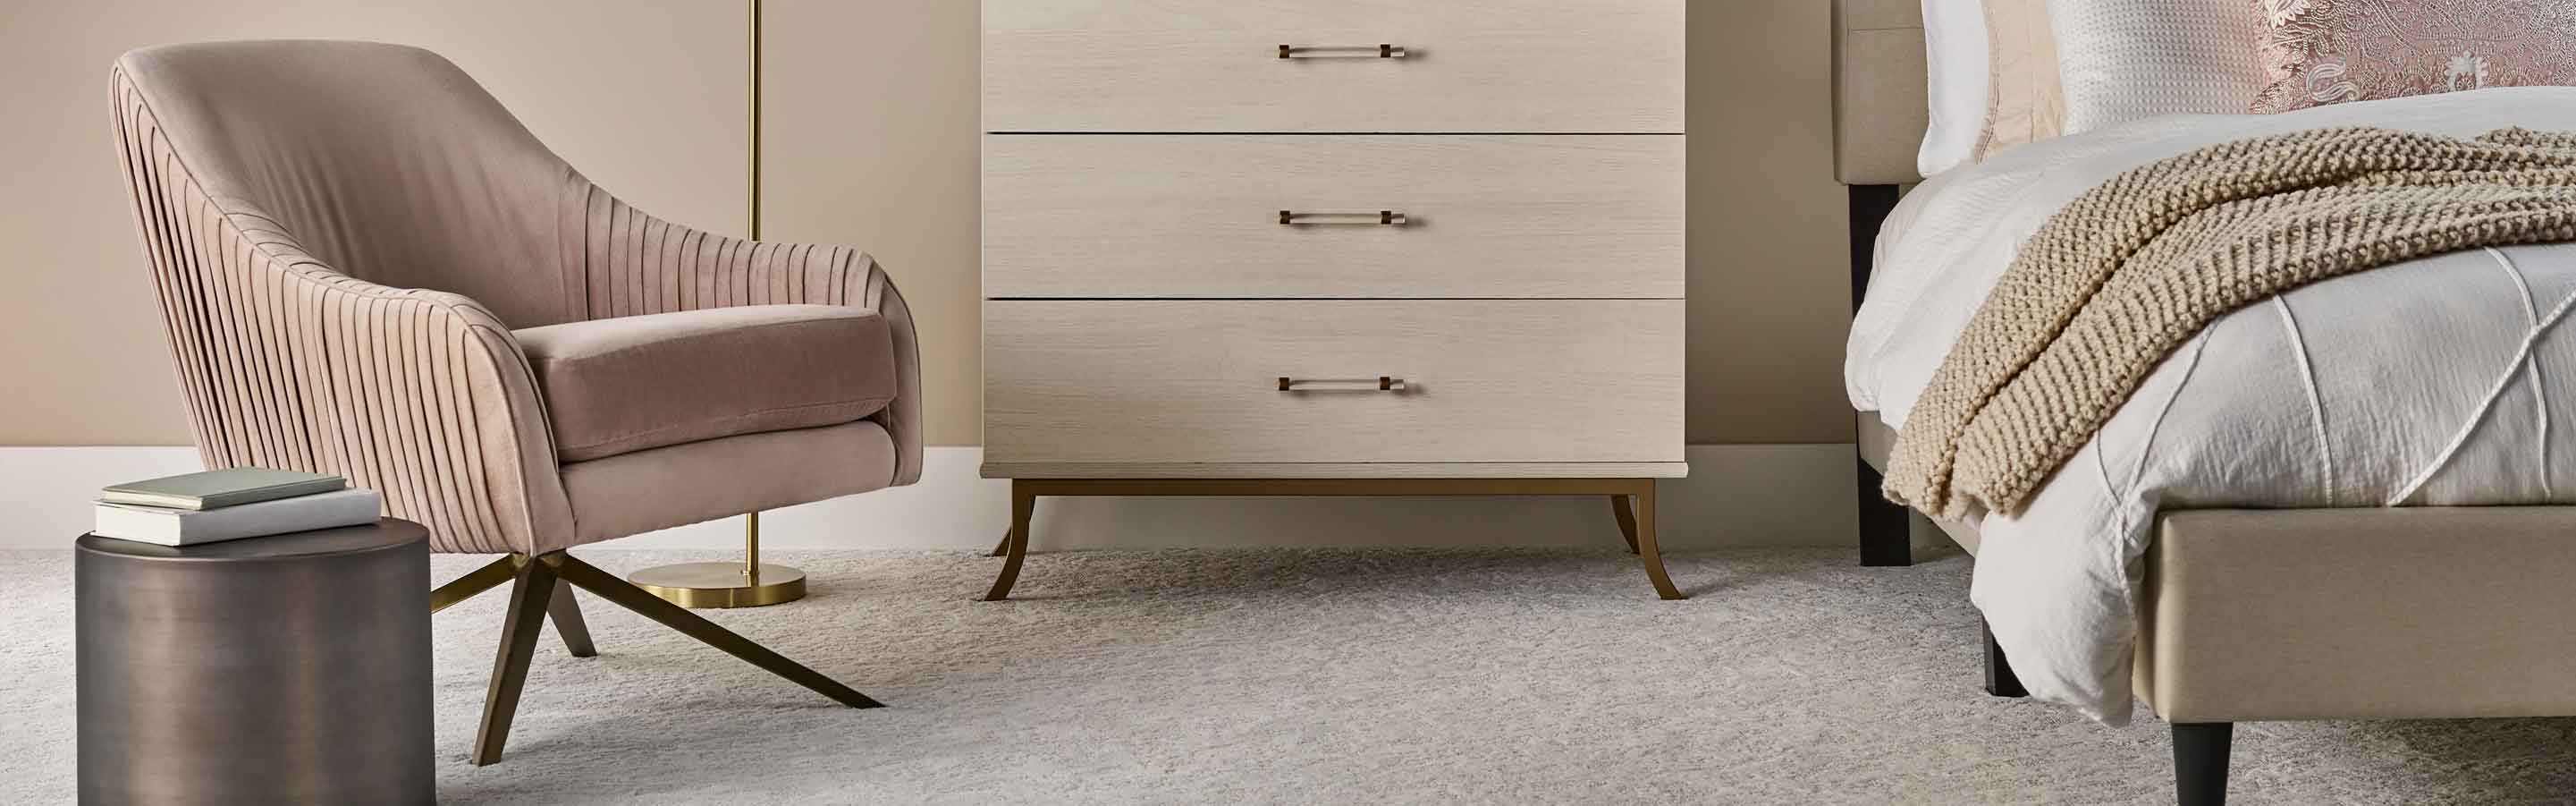 Warm white neutral tone soft carpet in bedroom